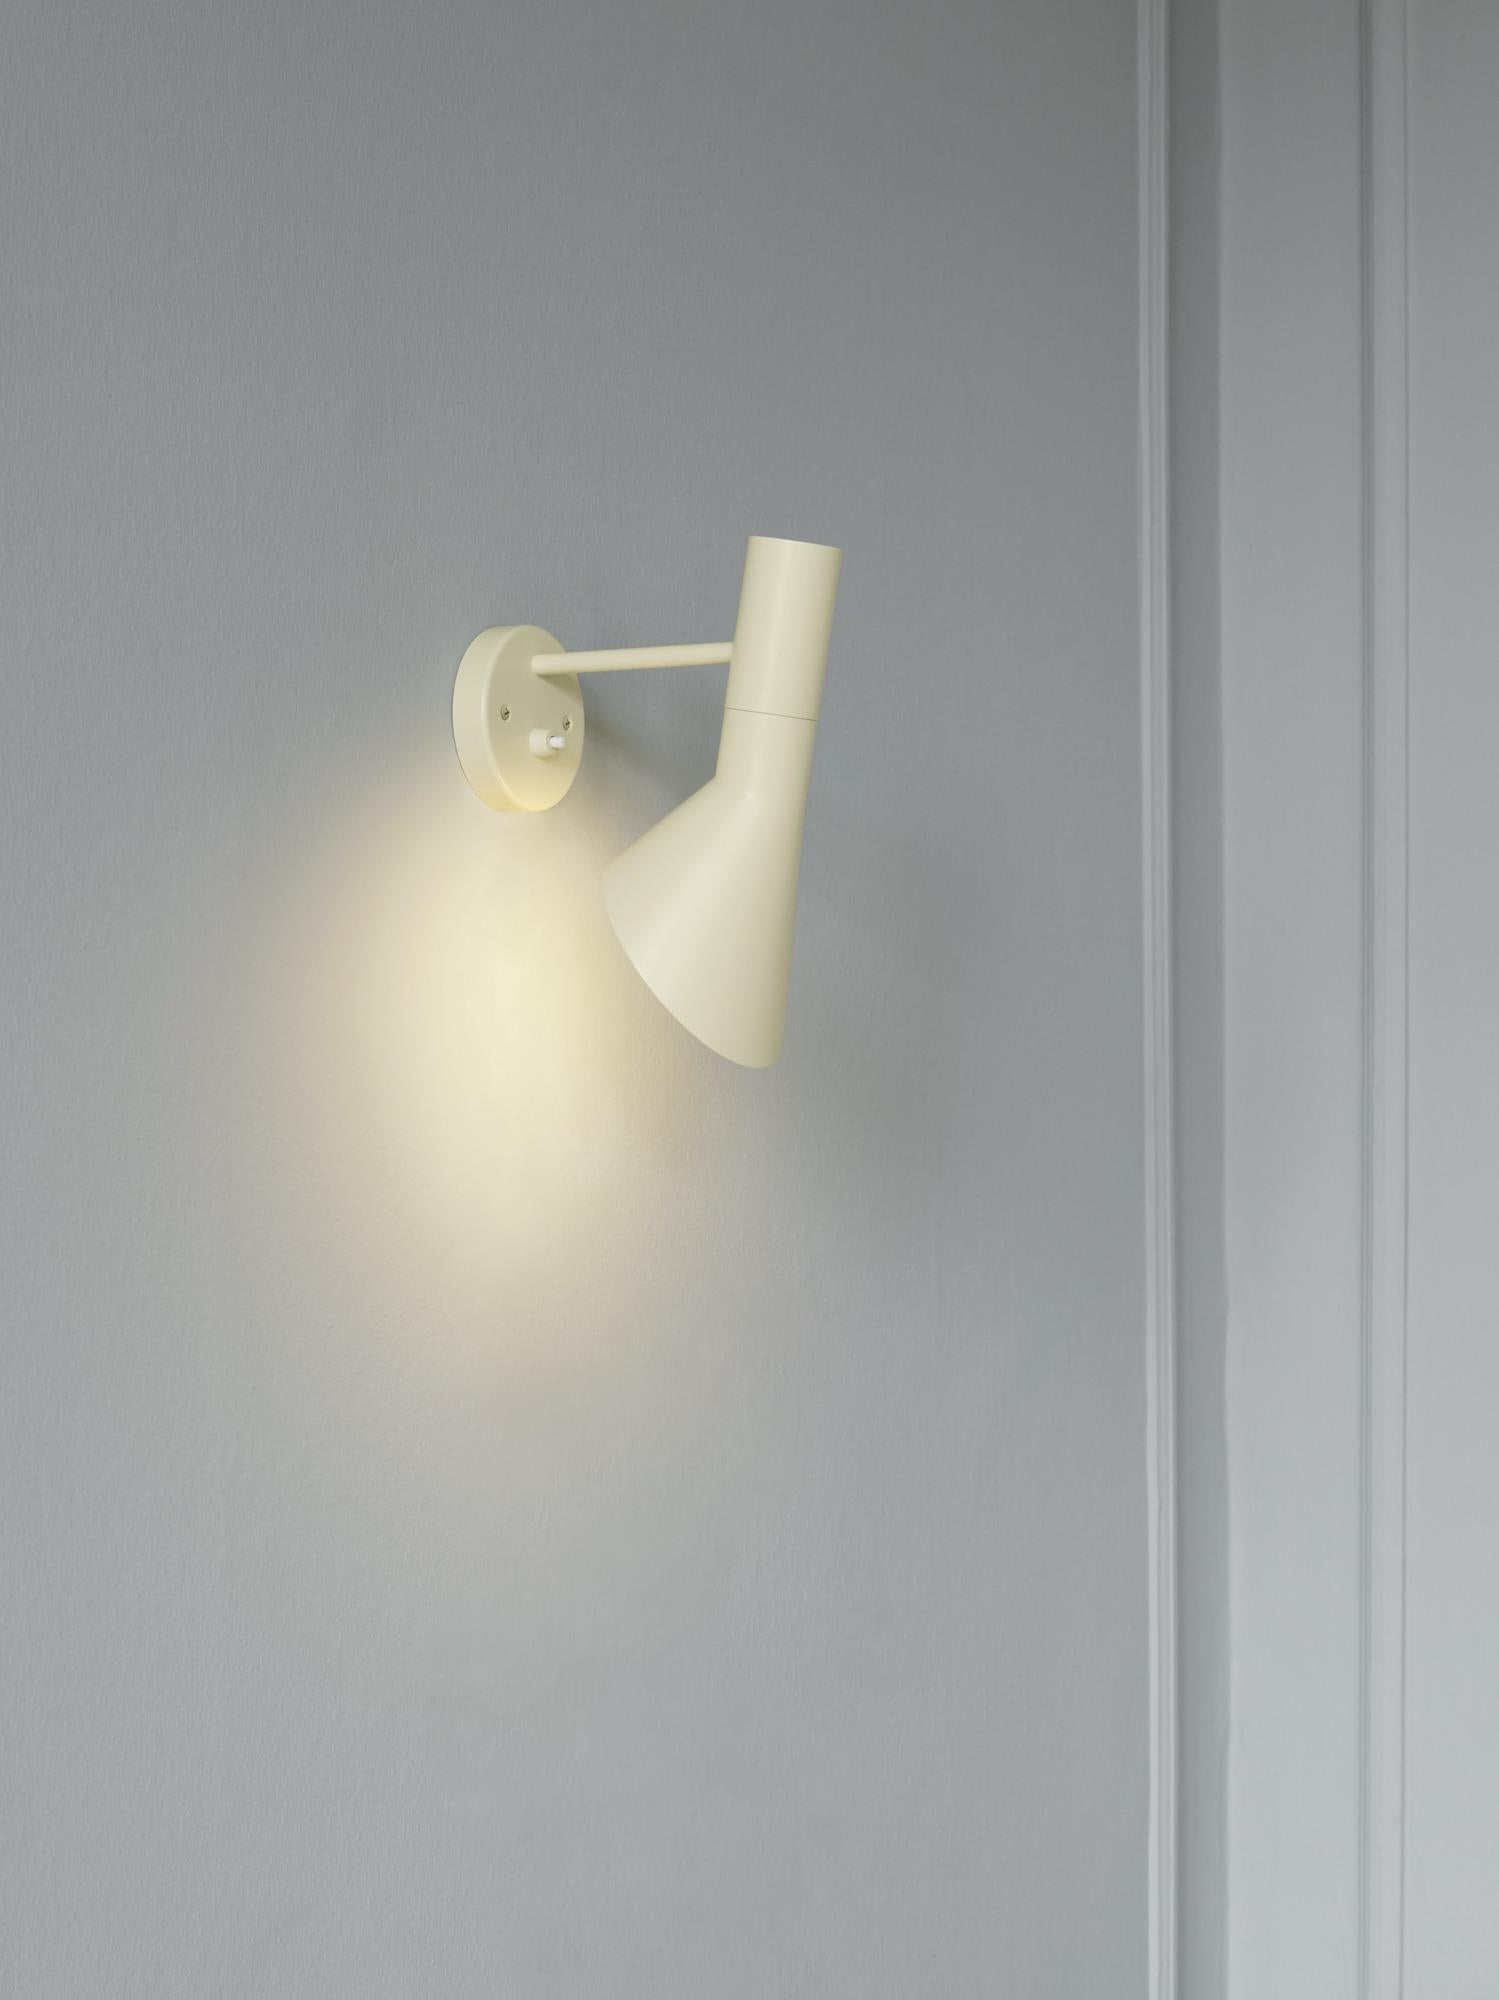 Arne Jacobsen AJ Wall Light for Louis Poulsen in Soft Lemon.
The AJ series was part of the lighting Jacobsen designed for the original SAS Royal Hotel. Today, his furniture and lighting designs are sought after by collectors worldwide. Executed in